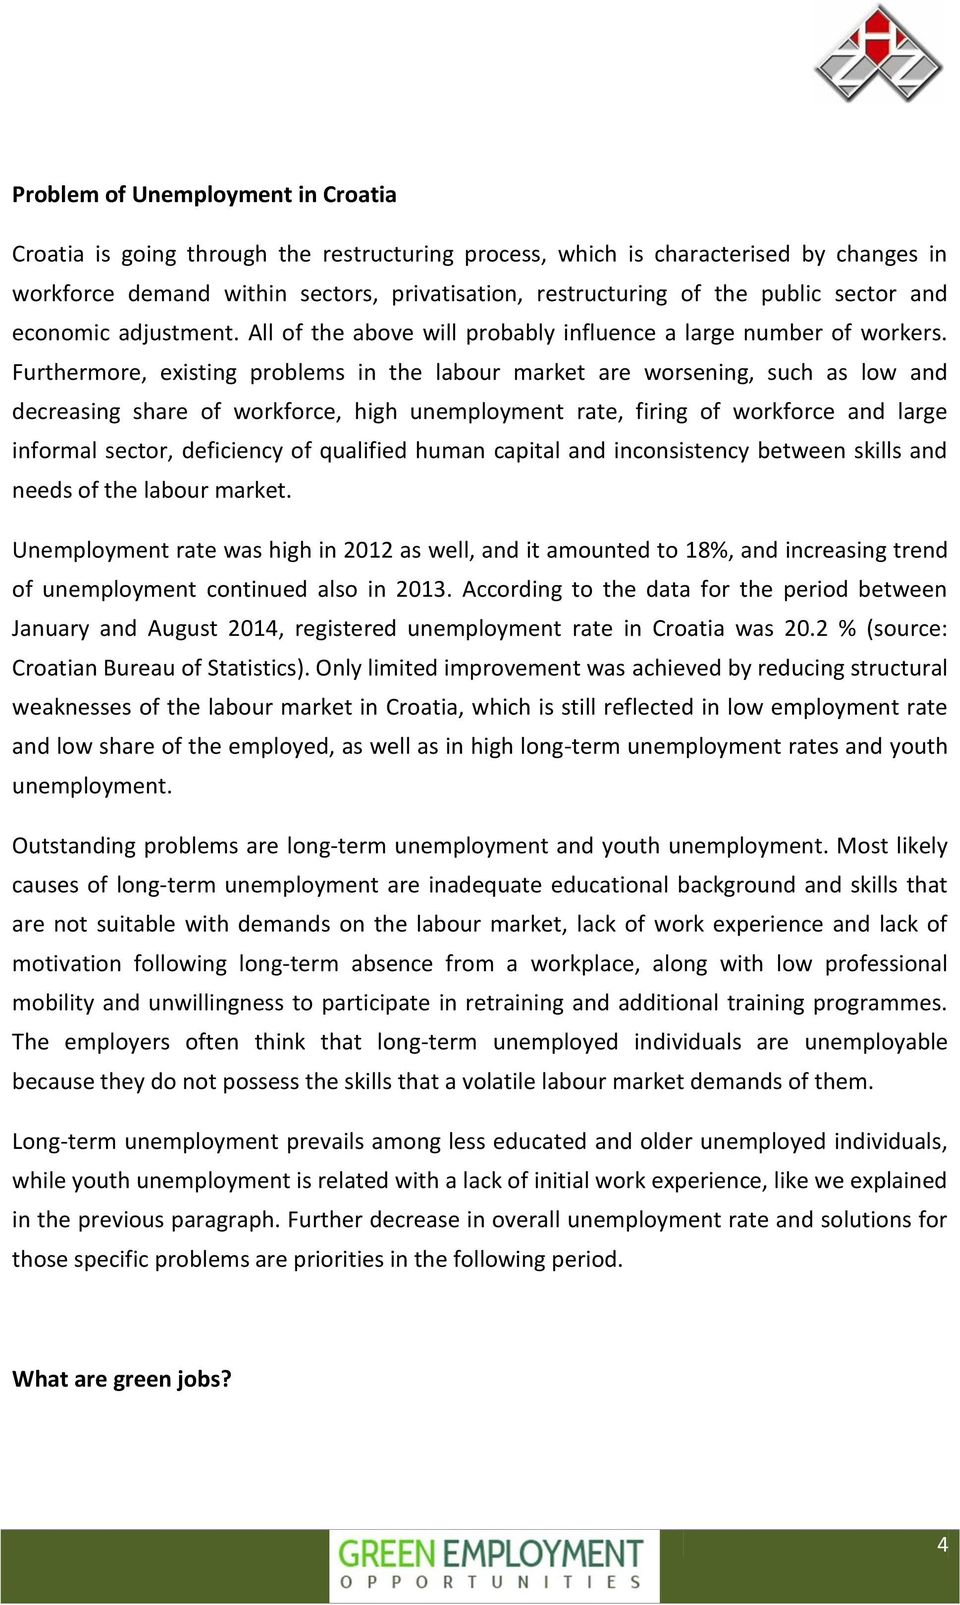 Furthermore, existing problems in the labour market are worsening, such as low and decreasing share of workforce, high unemployment rate, firing of workforce and large informal sector, deficiency of